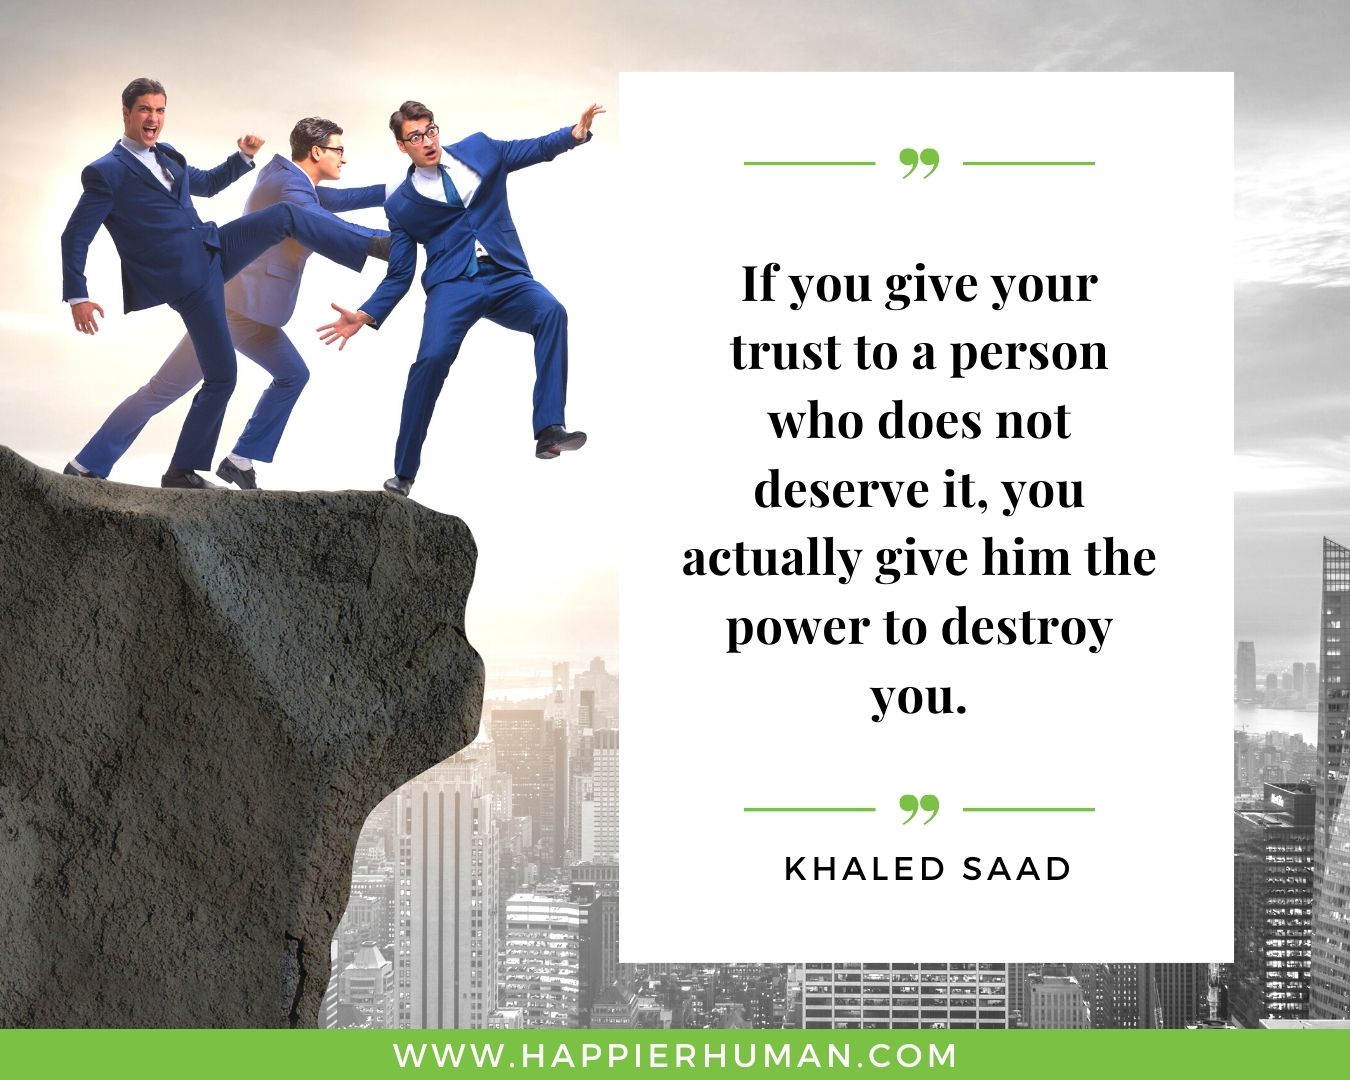 Broken Trust Quotes - “If you give your trust to a person who does not deserve it, you actually give him the power to destroy you.” - Khaled Saad